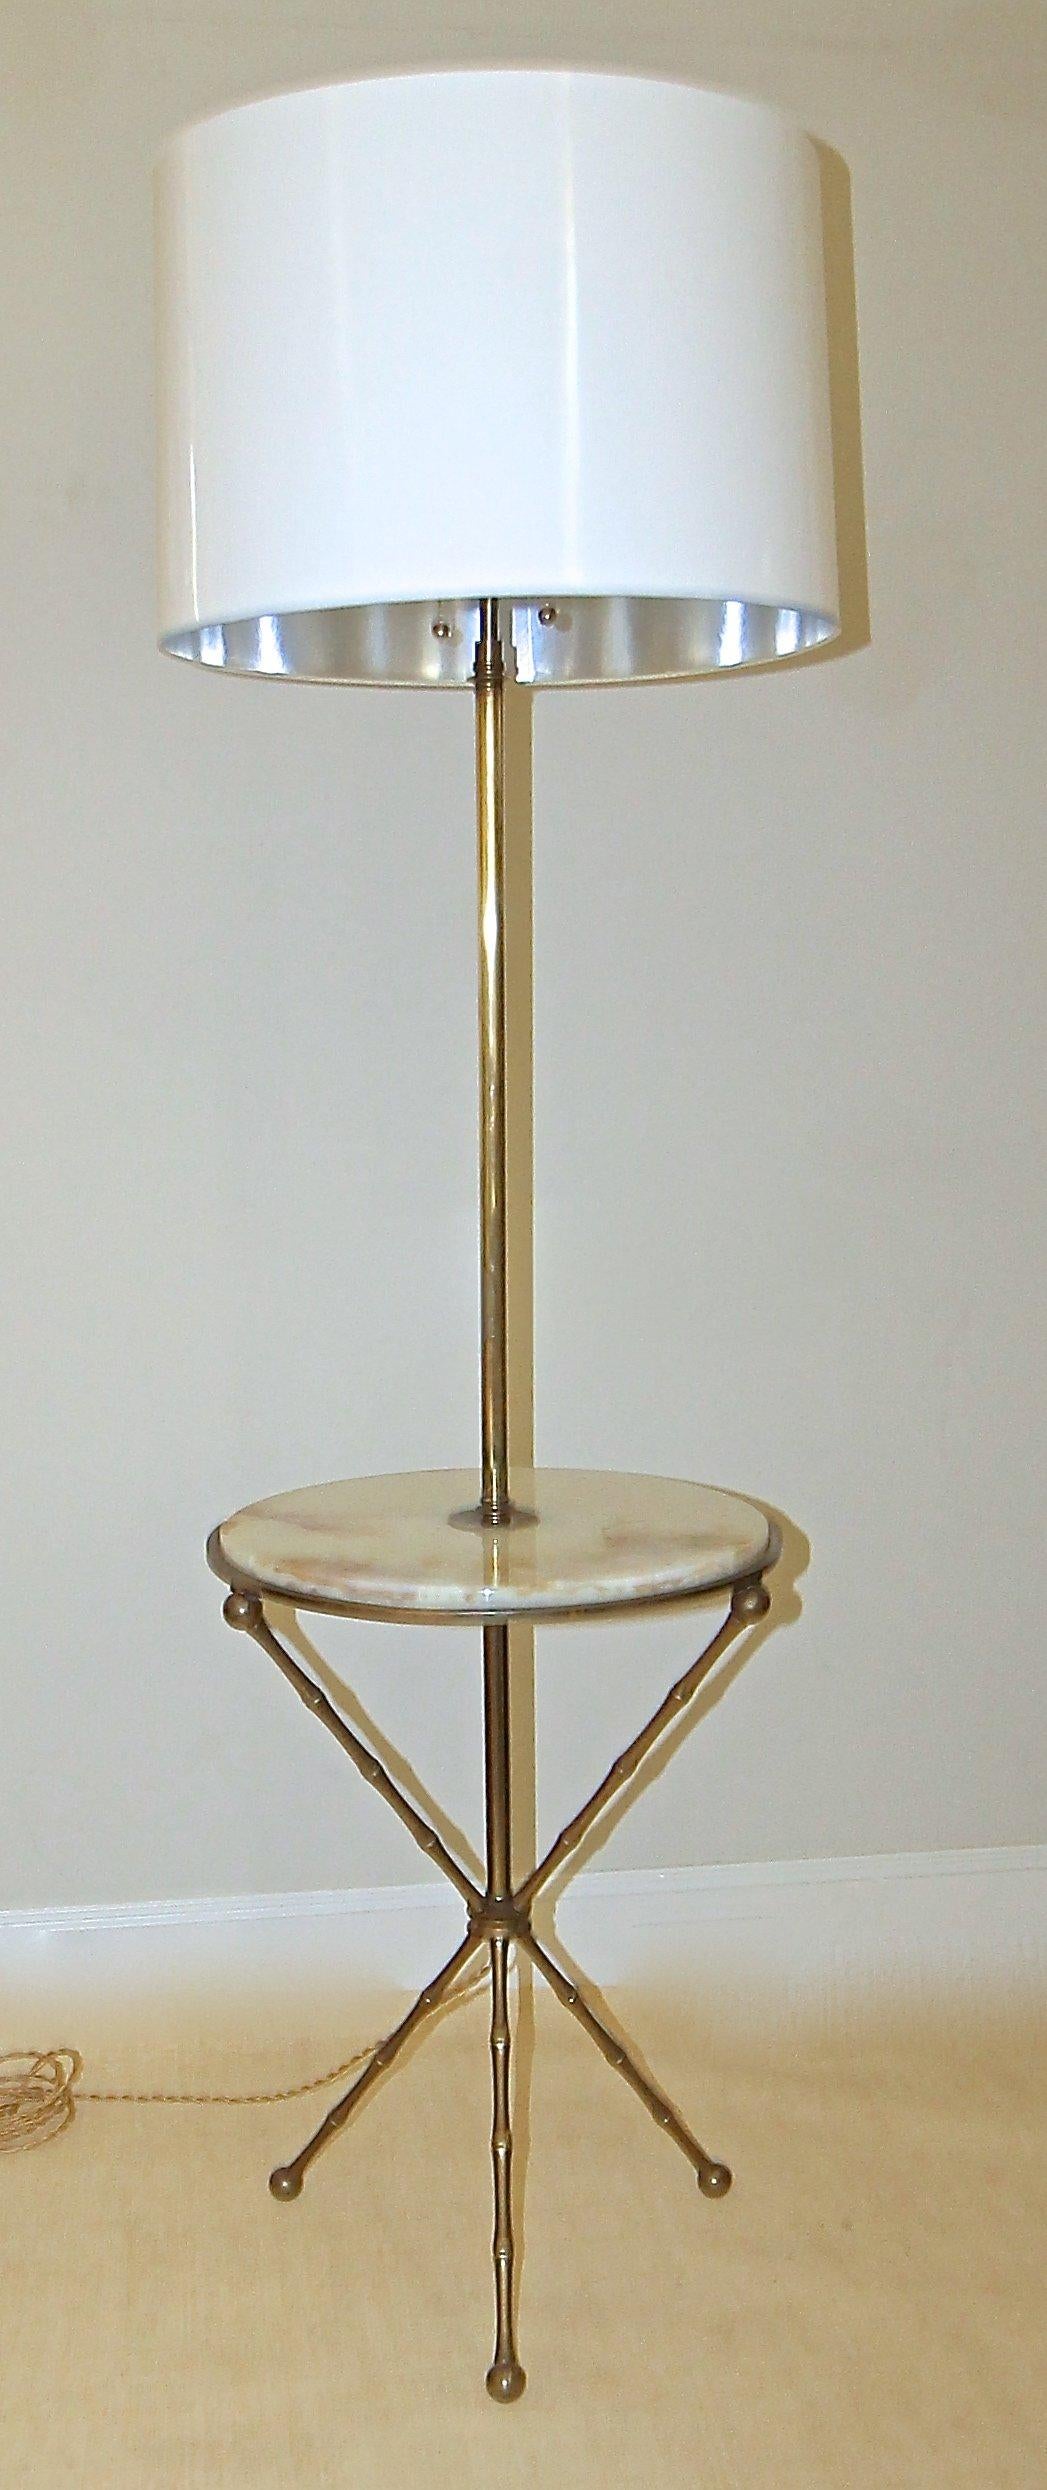 Beautiful and hard to find bronze faux bamboo lamp table with inset onyx top and tripod legs, attributed to Maison Bagues. Newly wired with brass double on/off pull sockets and French style rayon twisted cord. Shade not included and is shown for